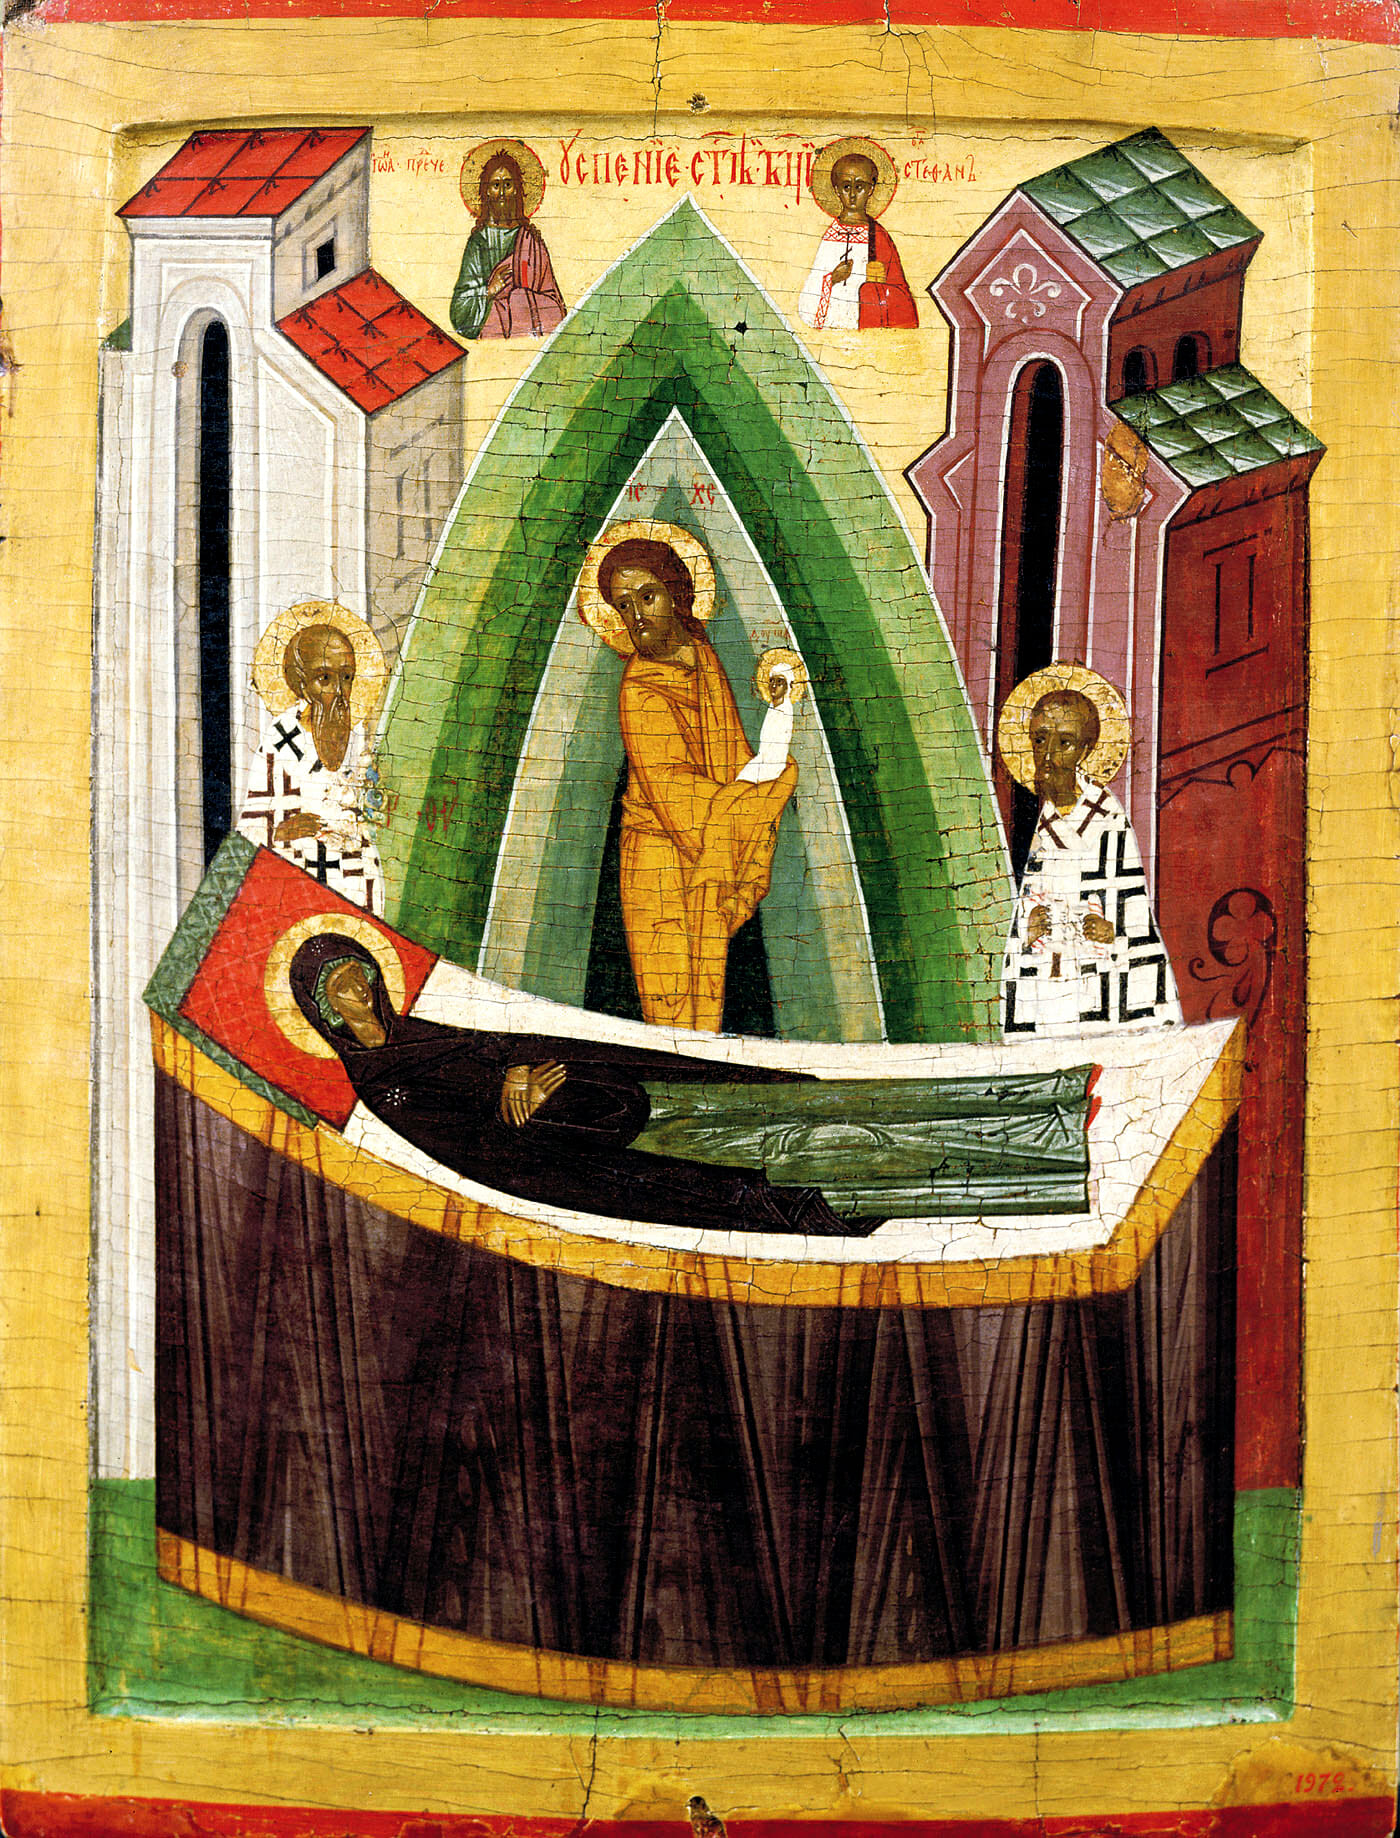 Dormition of the Mother of God. Icon. 15th century, Novgorod. Russian Museum, St. Petersburg. In this work abstraction prevails. It goes to show how broad of a range of stylistic variation can be found within what is commonly refered to as the "Byzantine style."